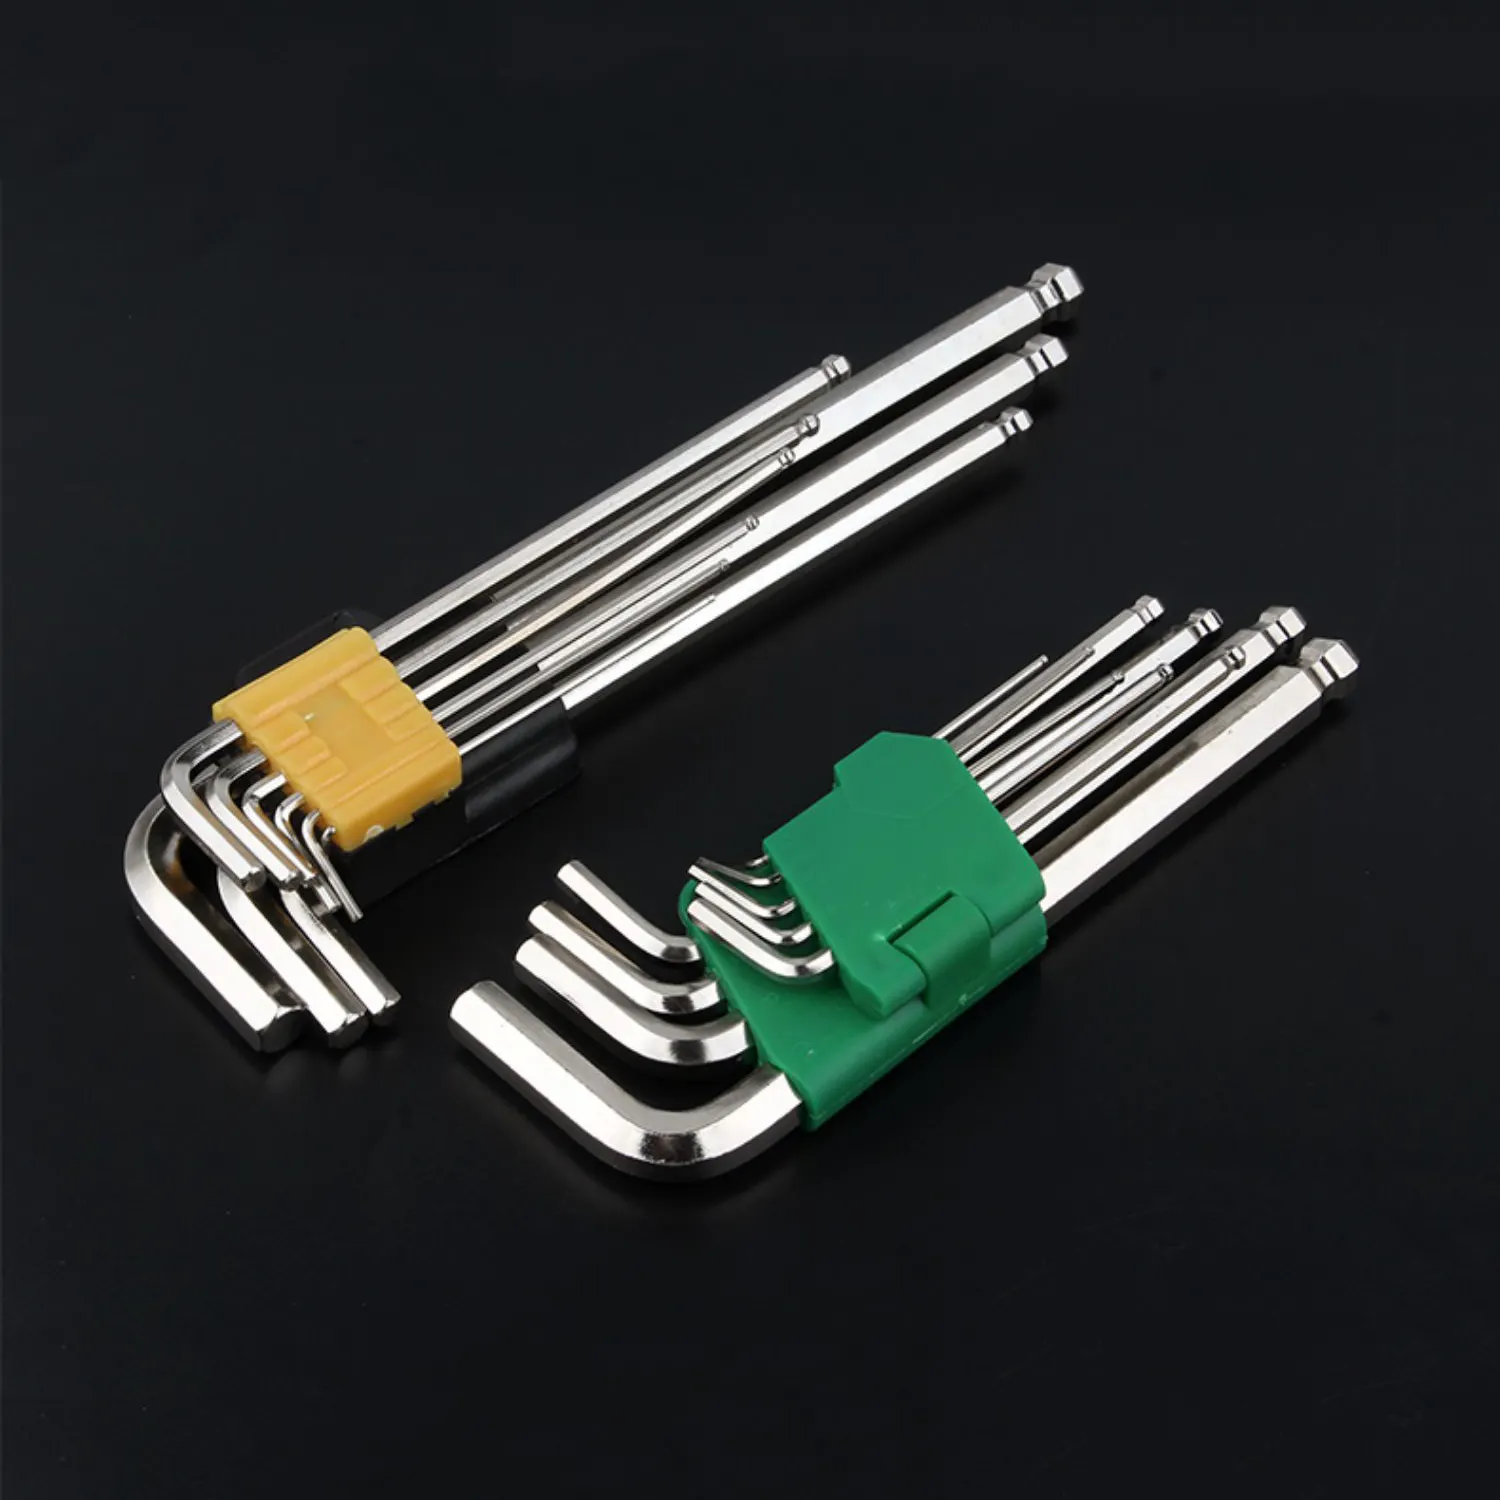 rc very long m2 m5 m16 stainless stud allen wrench set hex key screwdriver 3mm axle spanner drill bit inox 8x